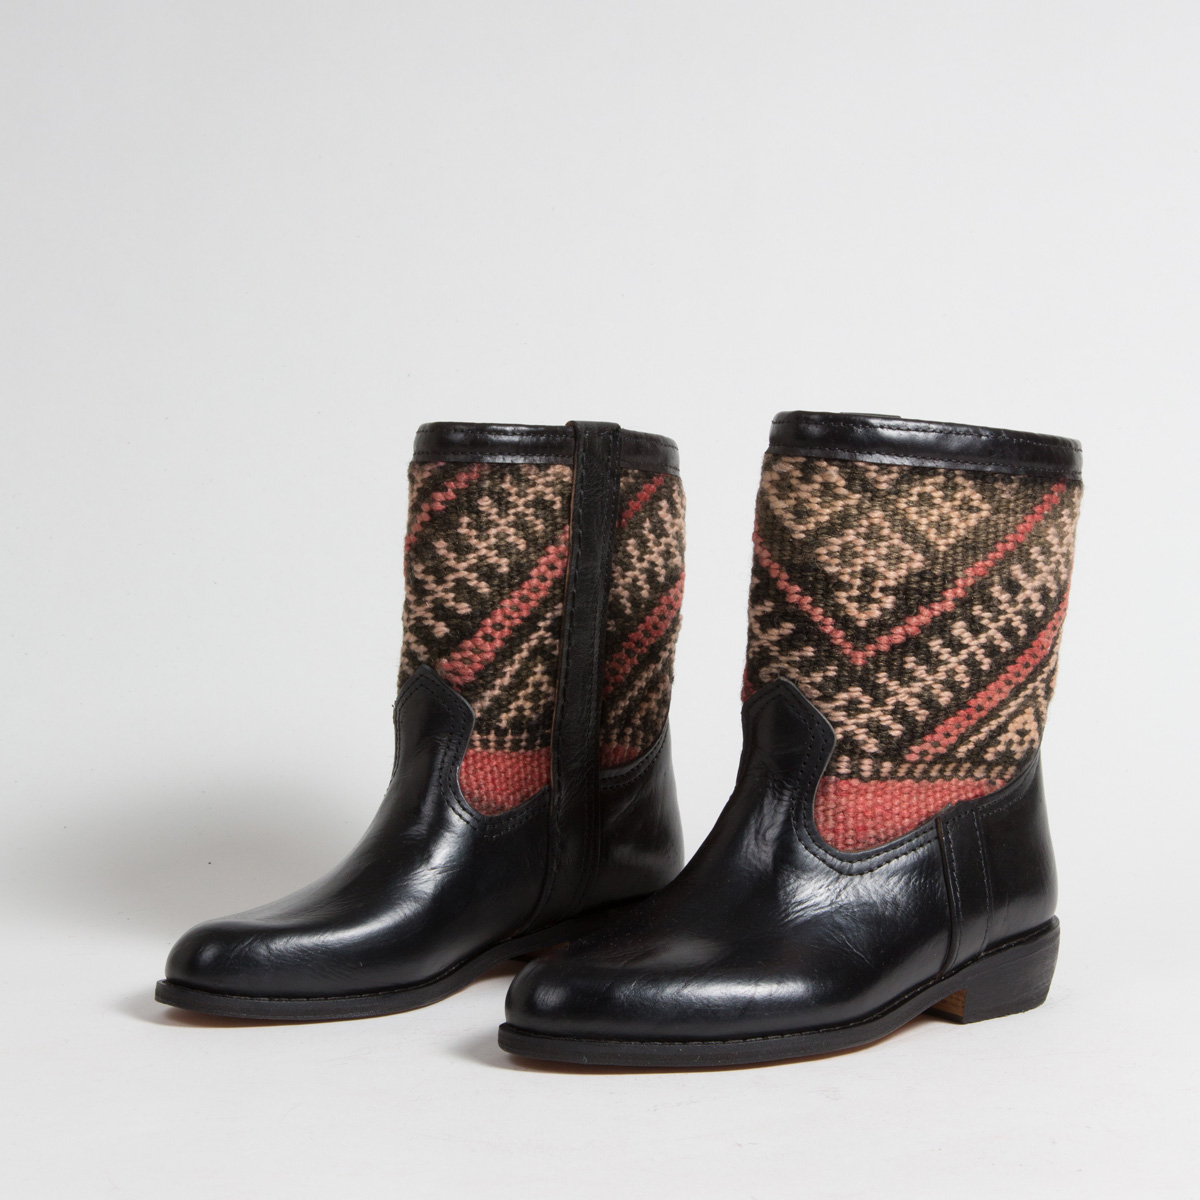 Bottines Kilim cuir mababouche artisanales (Réf. RPN2-36)